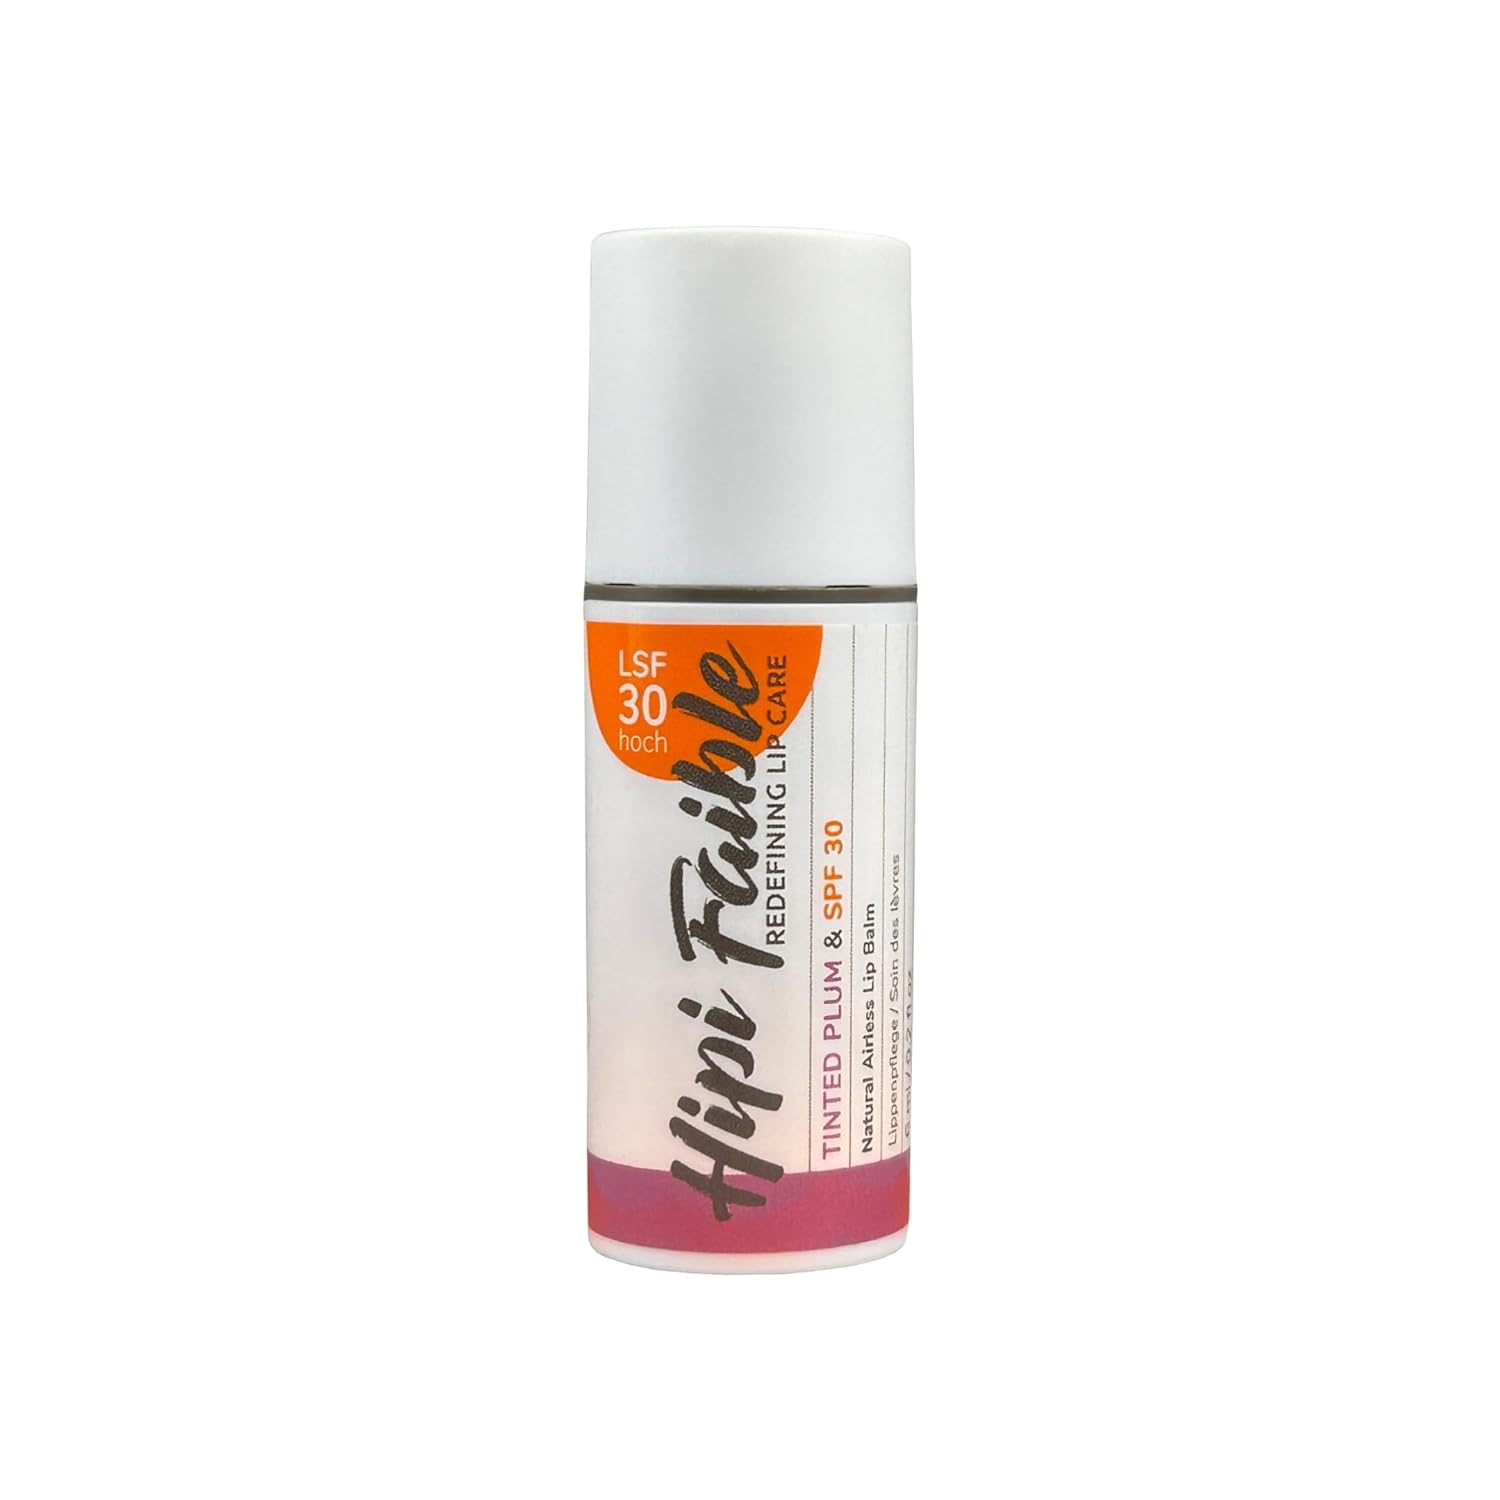 Hipi Faible Tinted Plum & SPF 30 Lip Care in Pump Dispenser with SPF 30 and Colour 6 ml